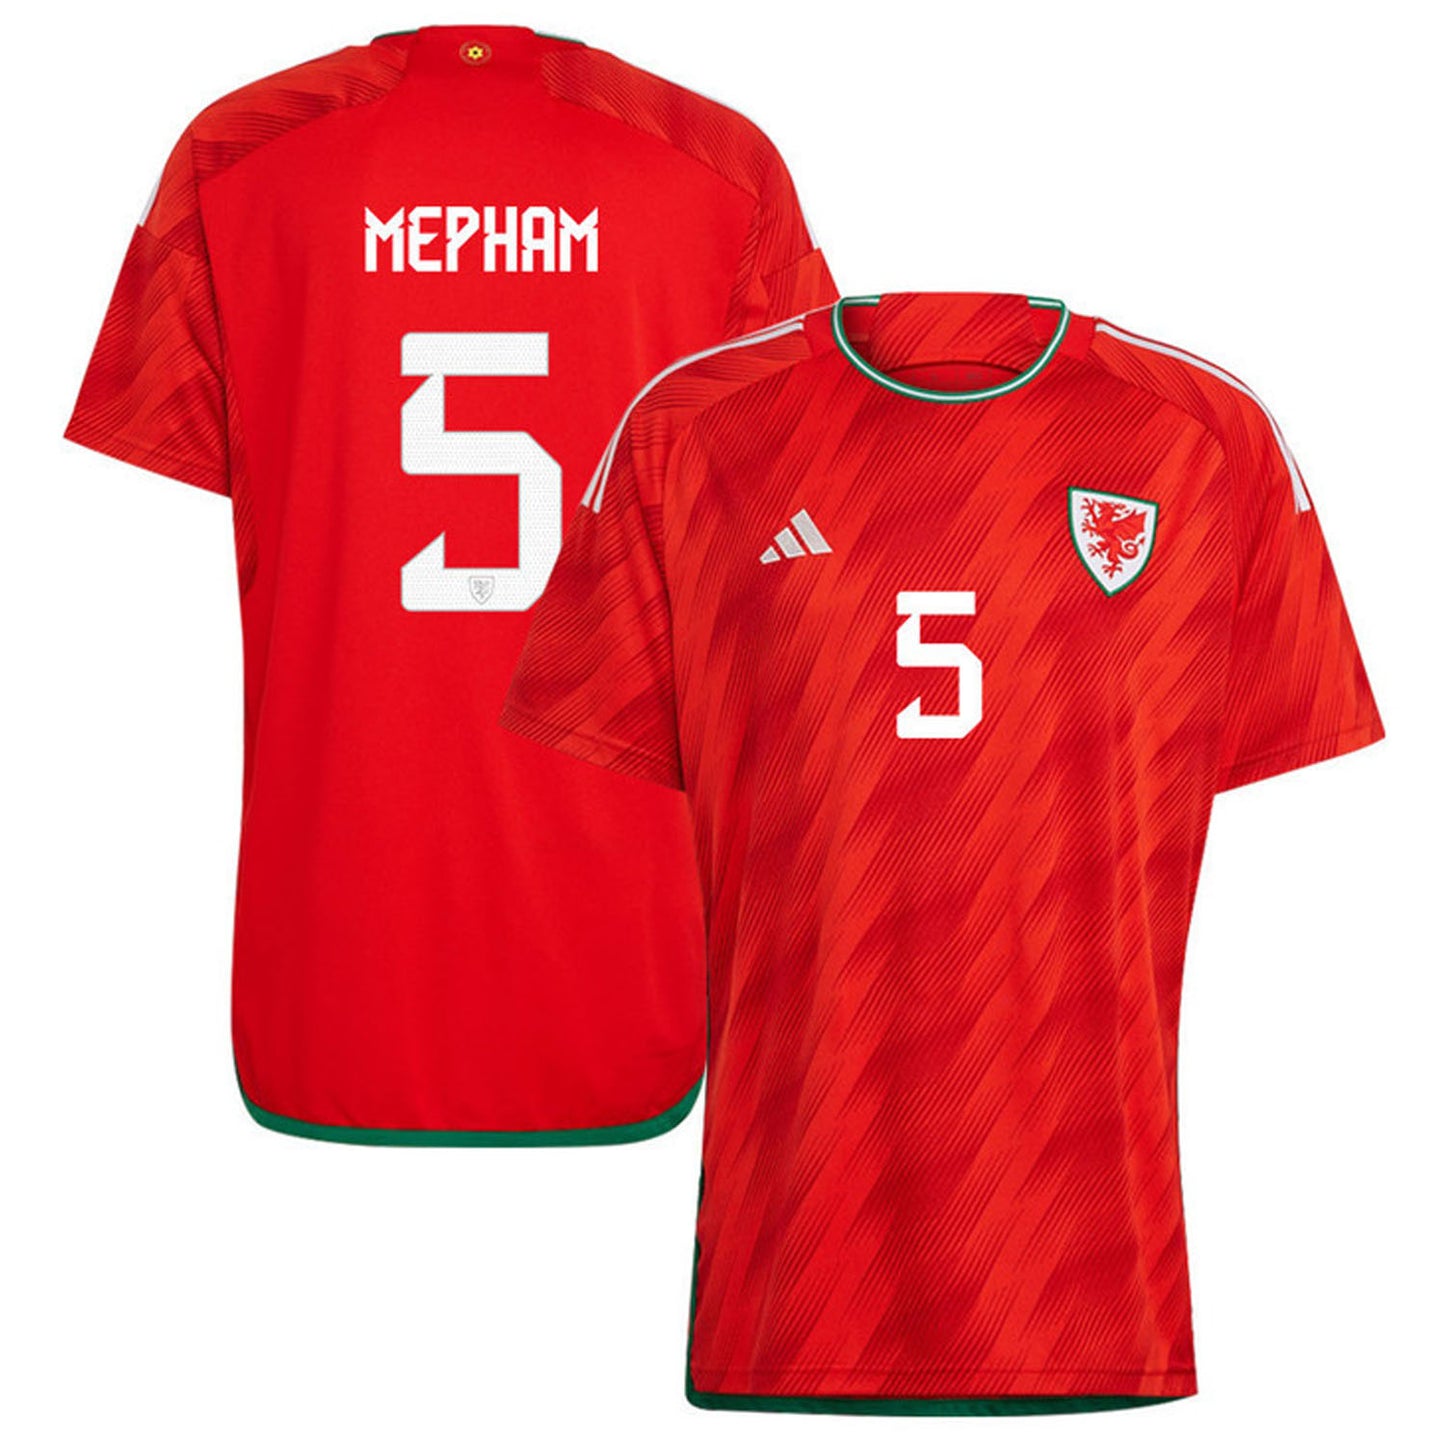 Chris Mepham Wales 5 Fifa World Cup Jersey